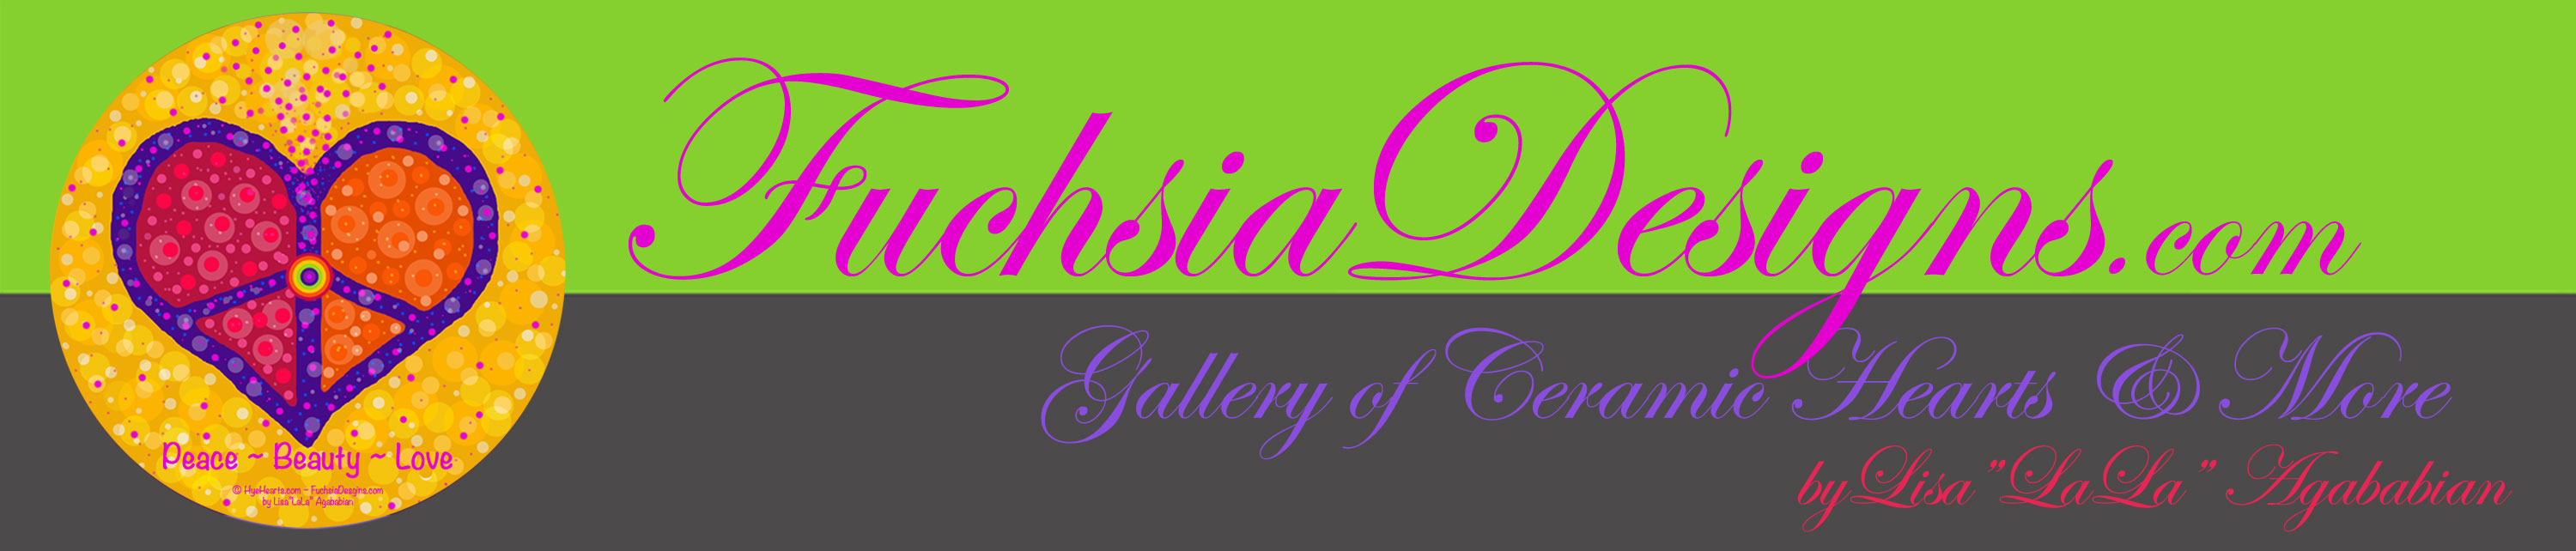 FuchsiaDesigns.com Banner and Link to Home Page